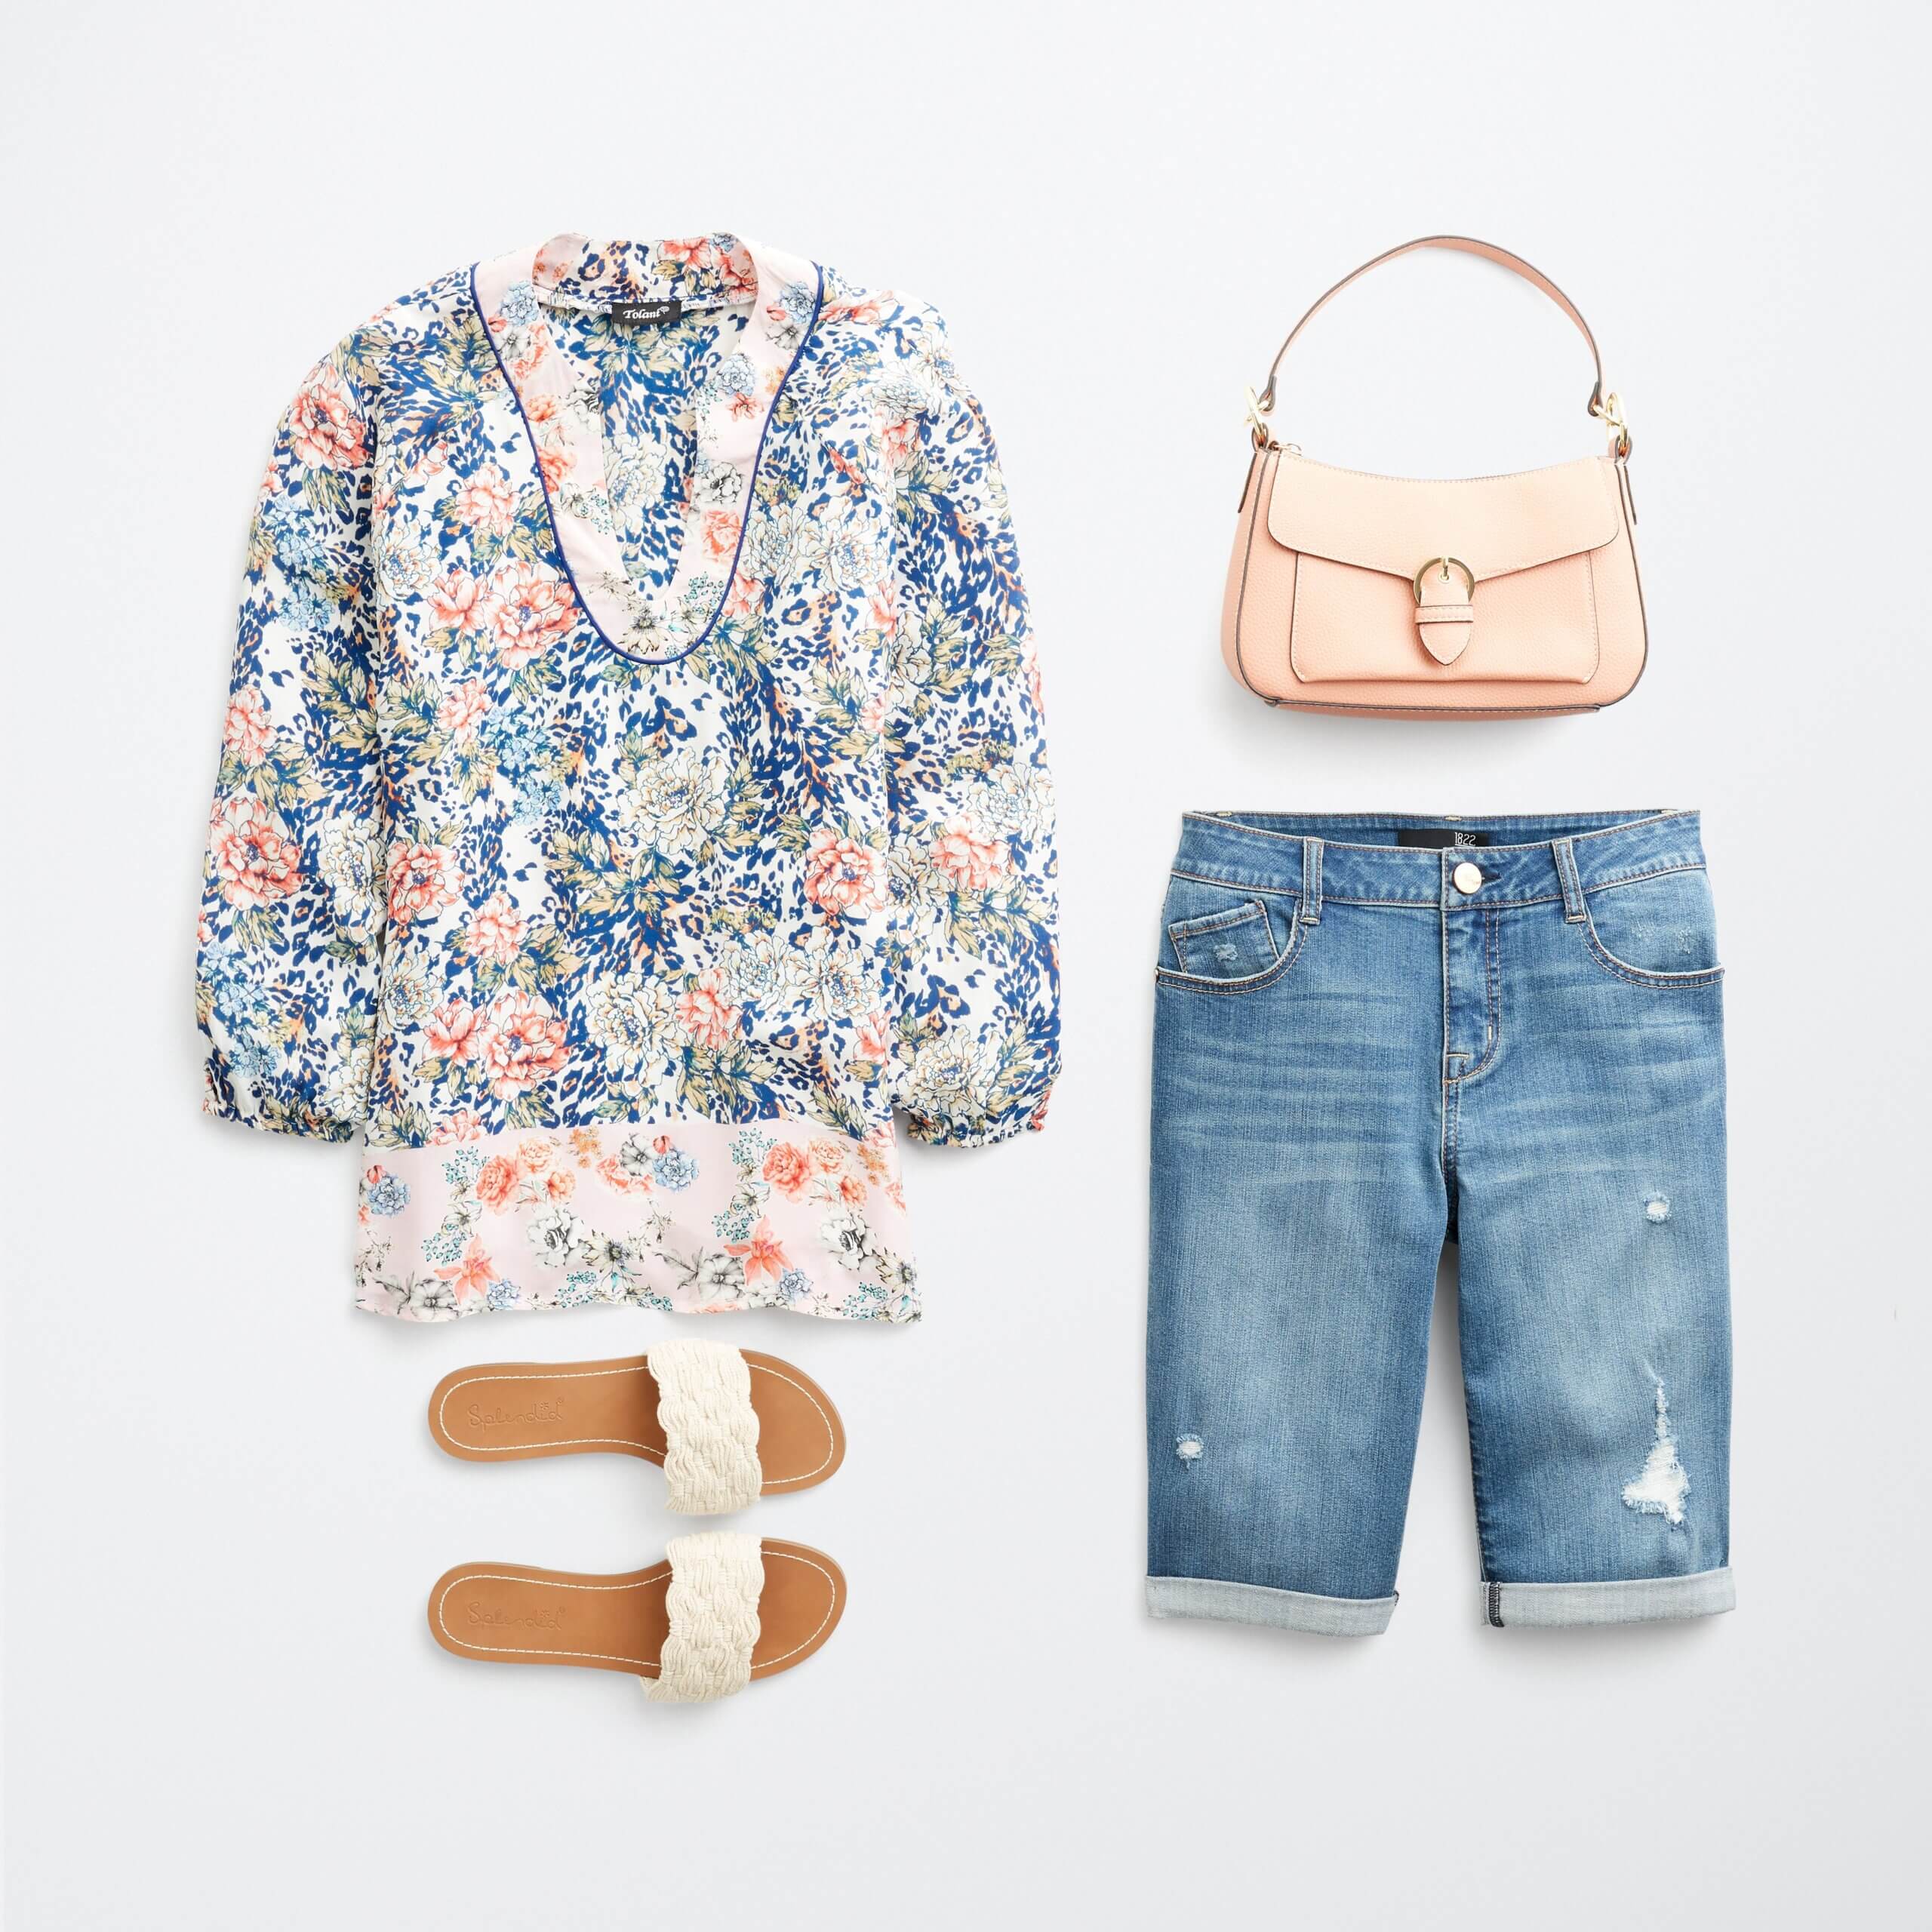 Stitch Fix Women's outfit laydown featuring blue, pink and cream printed blouse with blue denim bermuda shorts, pink purse and white slide sandals. 